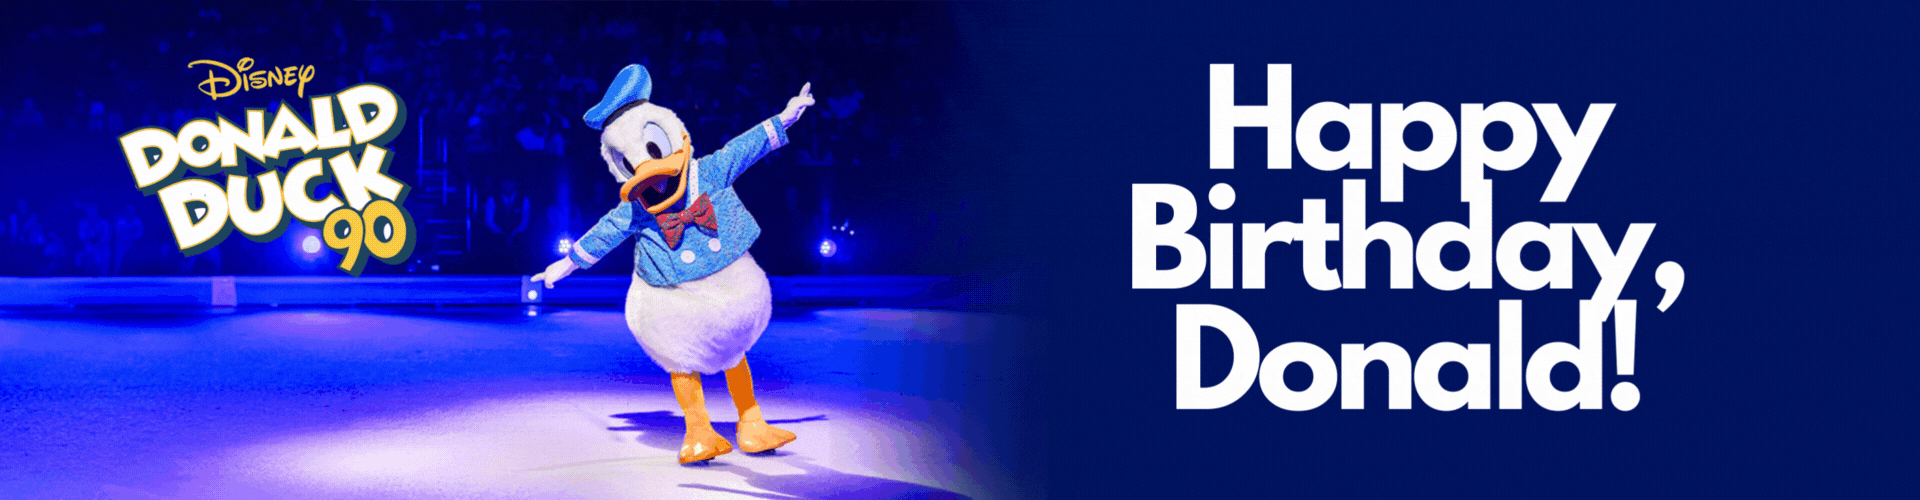 It’s Donald Duck Day!